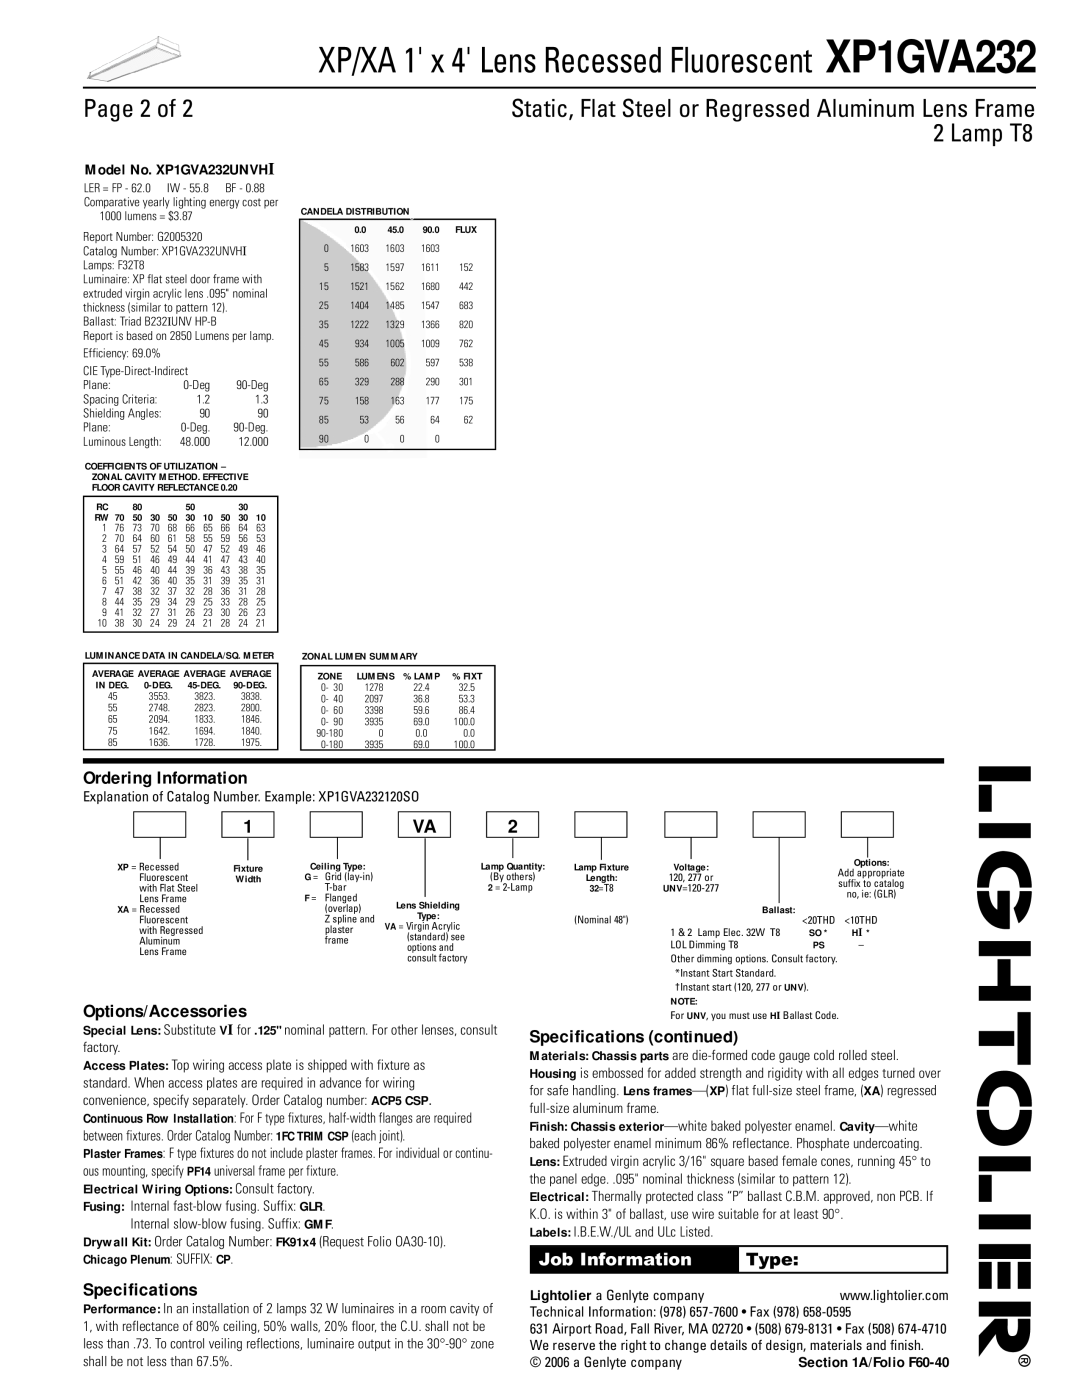 Lightolier Page 2 of, Ordering Information, Options/Accessories, Specifications, Model No. XP1GVA232UNVHI, Type 